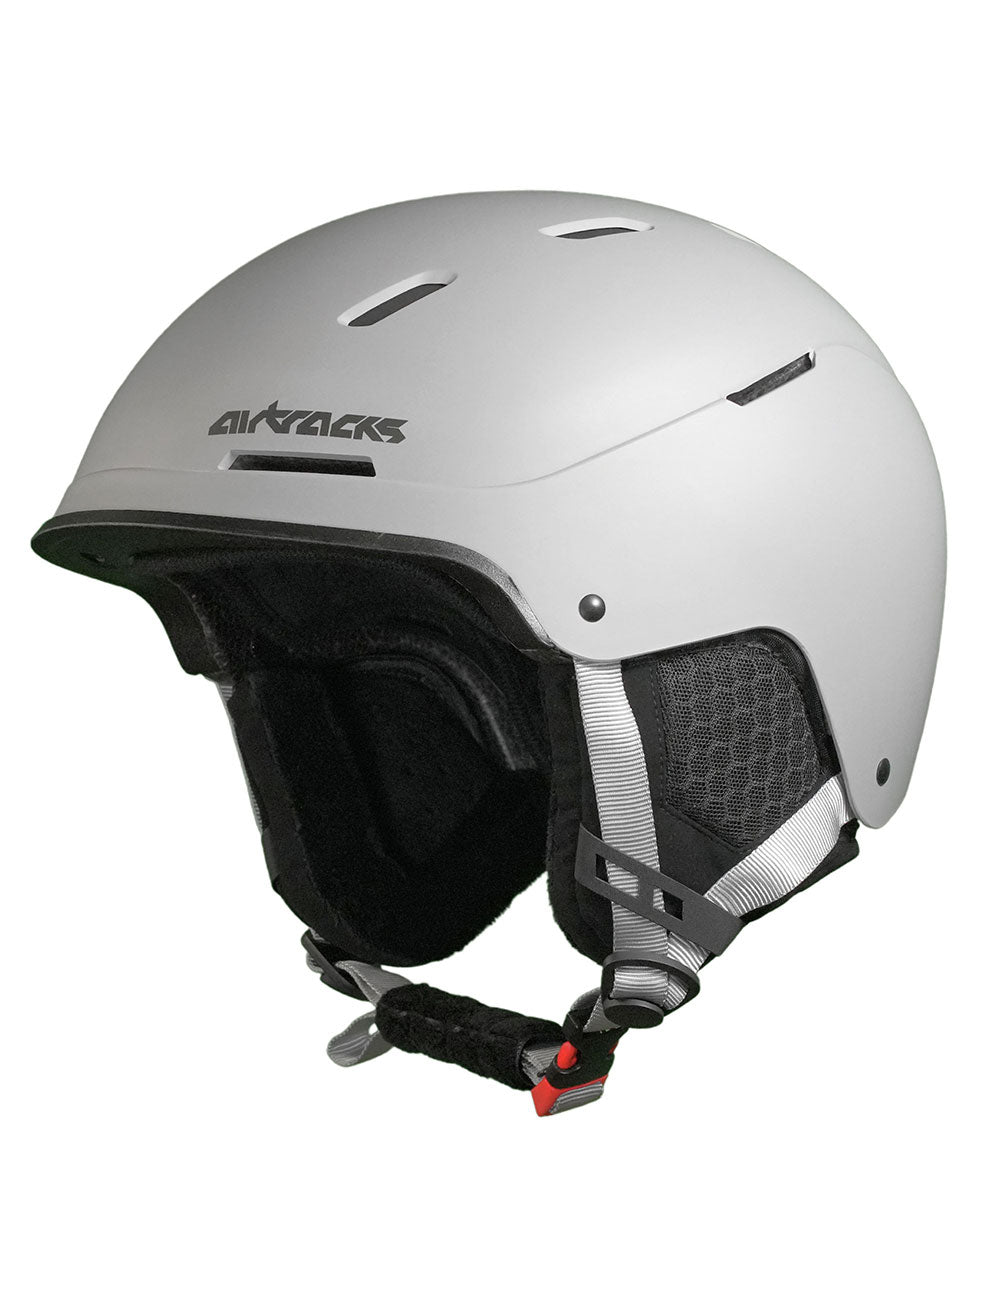 Strong_SB_Helm_sps2103_1300_4